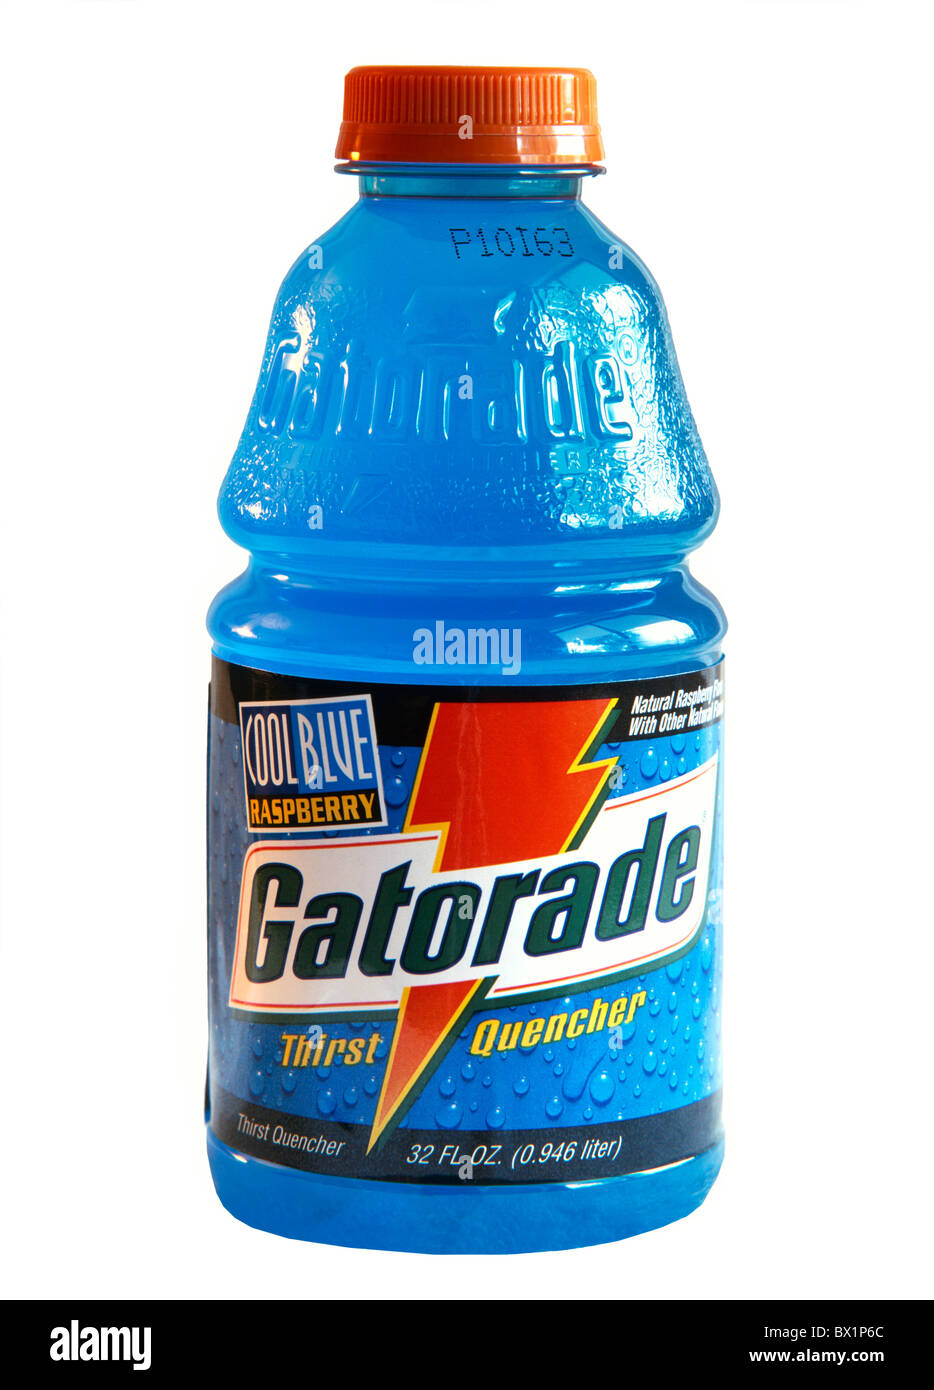 https://c8.alamy.com/comp/BX1P6C/bottle-of-gatorade-with-the-old-style-label-and-branding-usa-BX1P6C.jpg